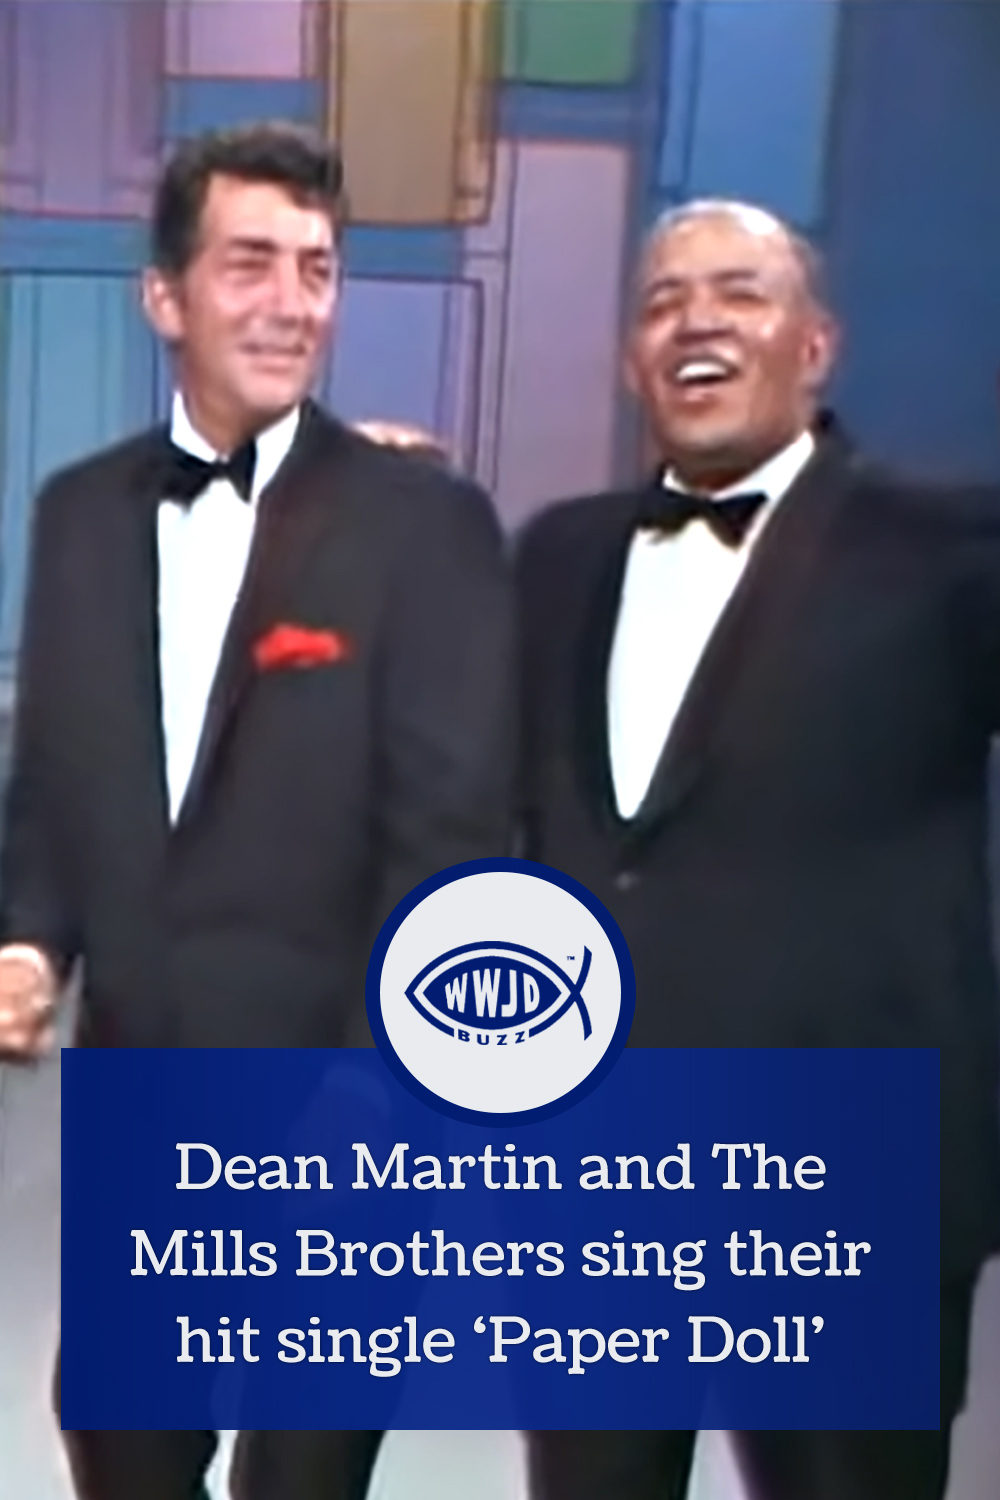 Dean Martin and The Mills Brothers sing their hit single \'Paper Doll\'